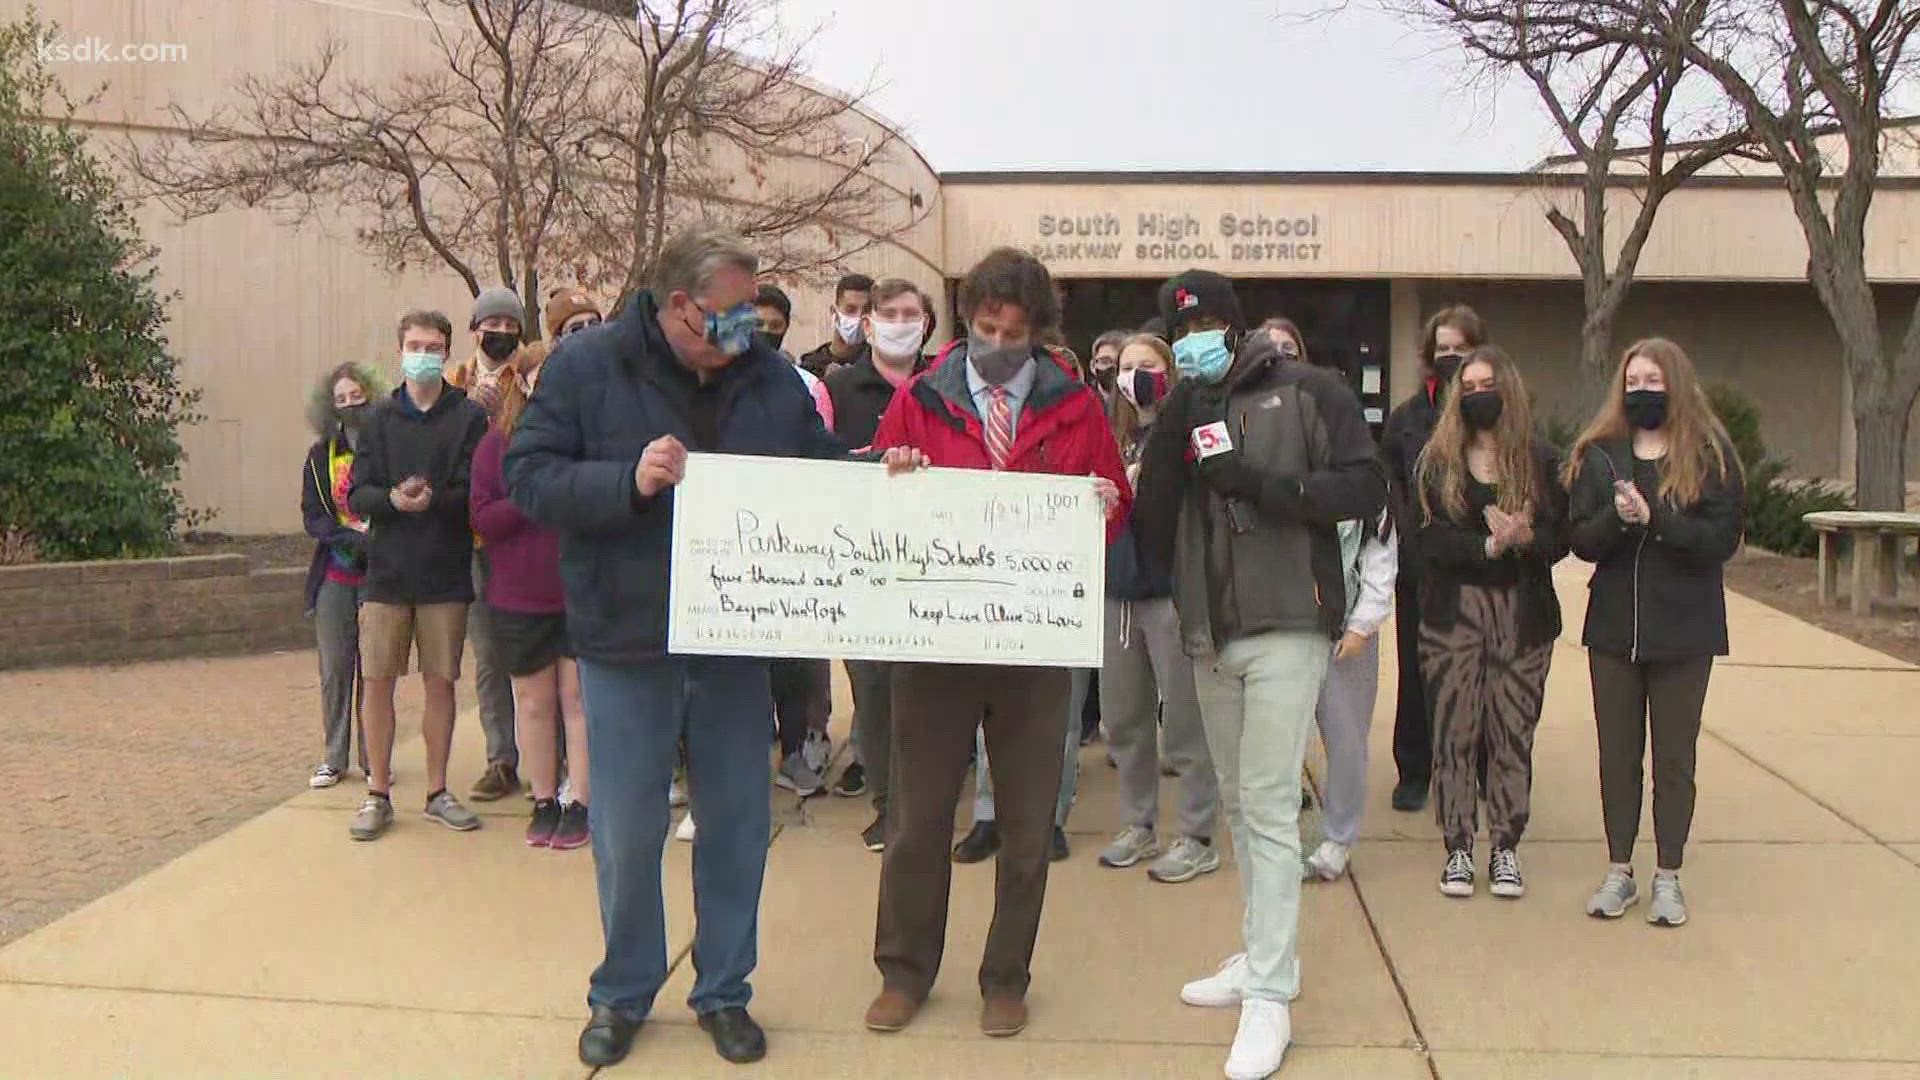 Parkway South High School was the winner of a $5,000 grant from Keep Live Alive St. Louis and Beyond Van Gogh St. Louis